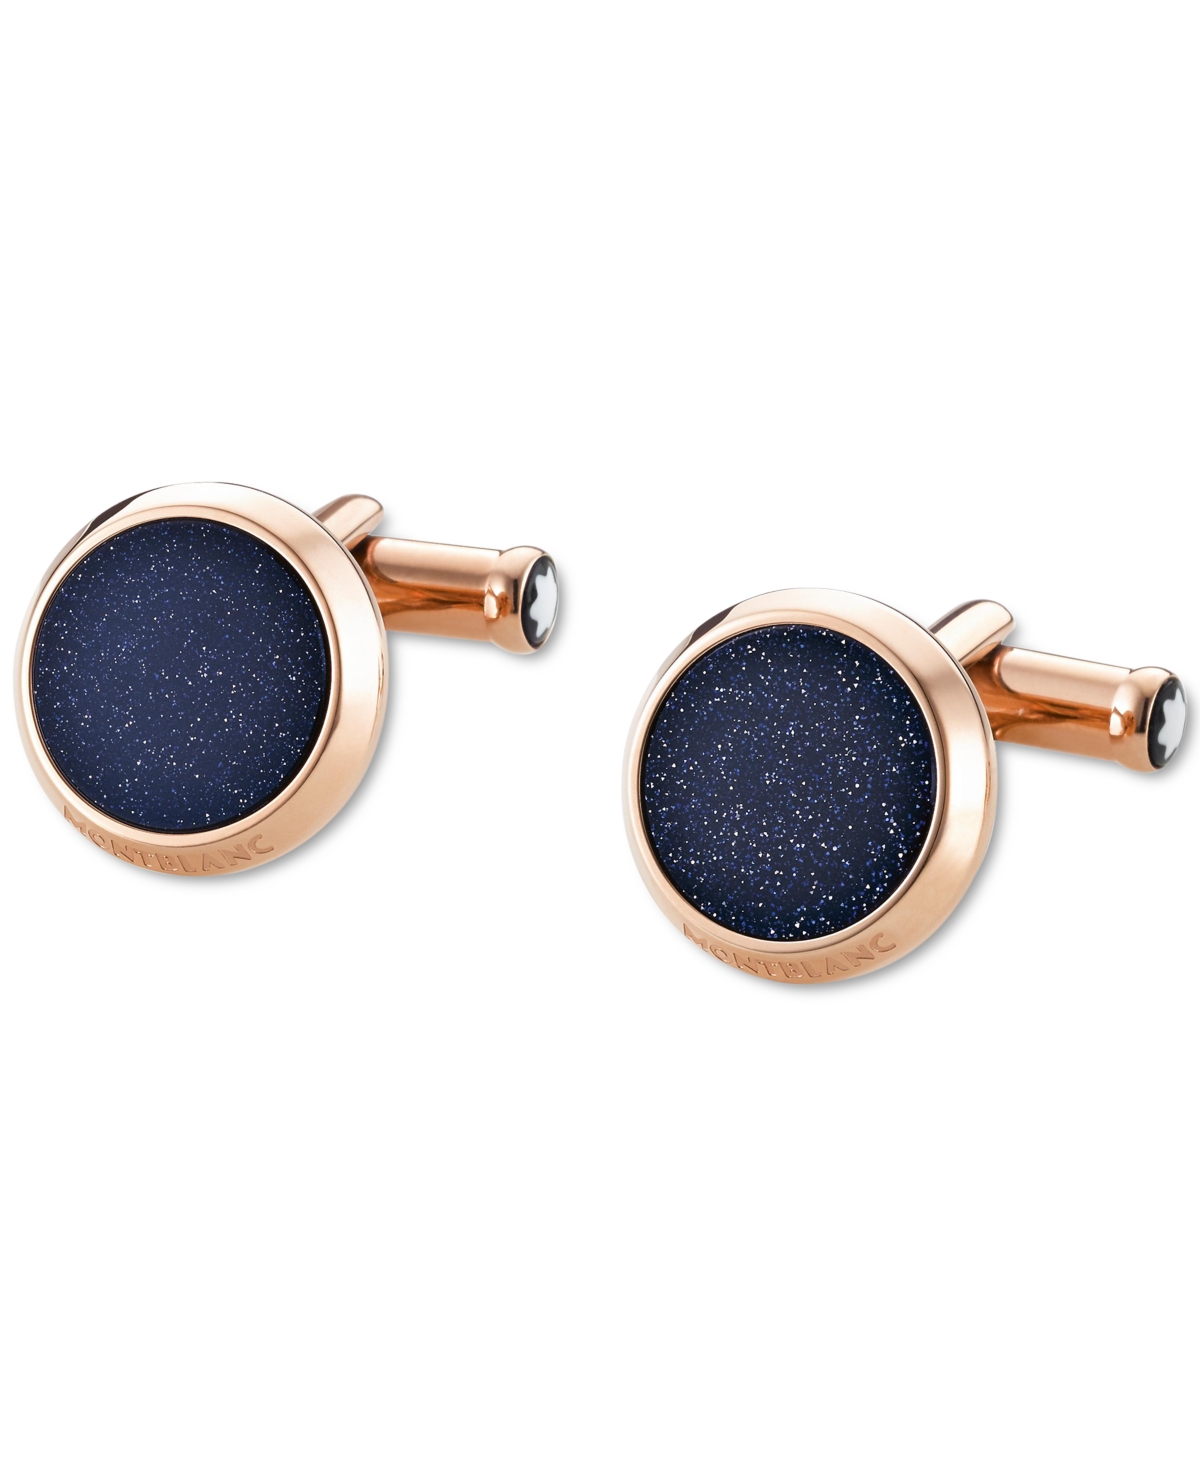 Shop Montblanc Meisterstuck Rose Gold Pvd & Blue Stone Cuff Links In Rose Stainless Steel